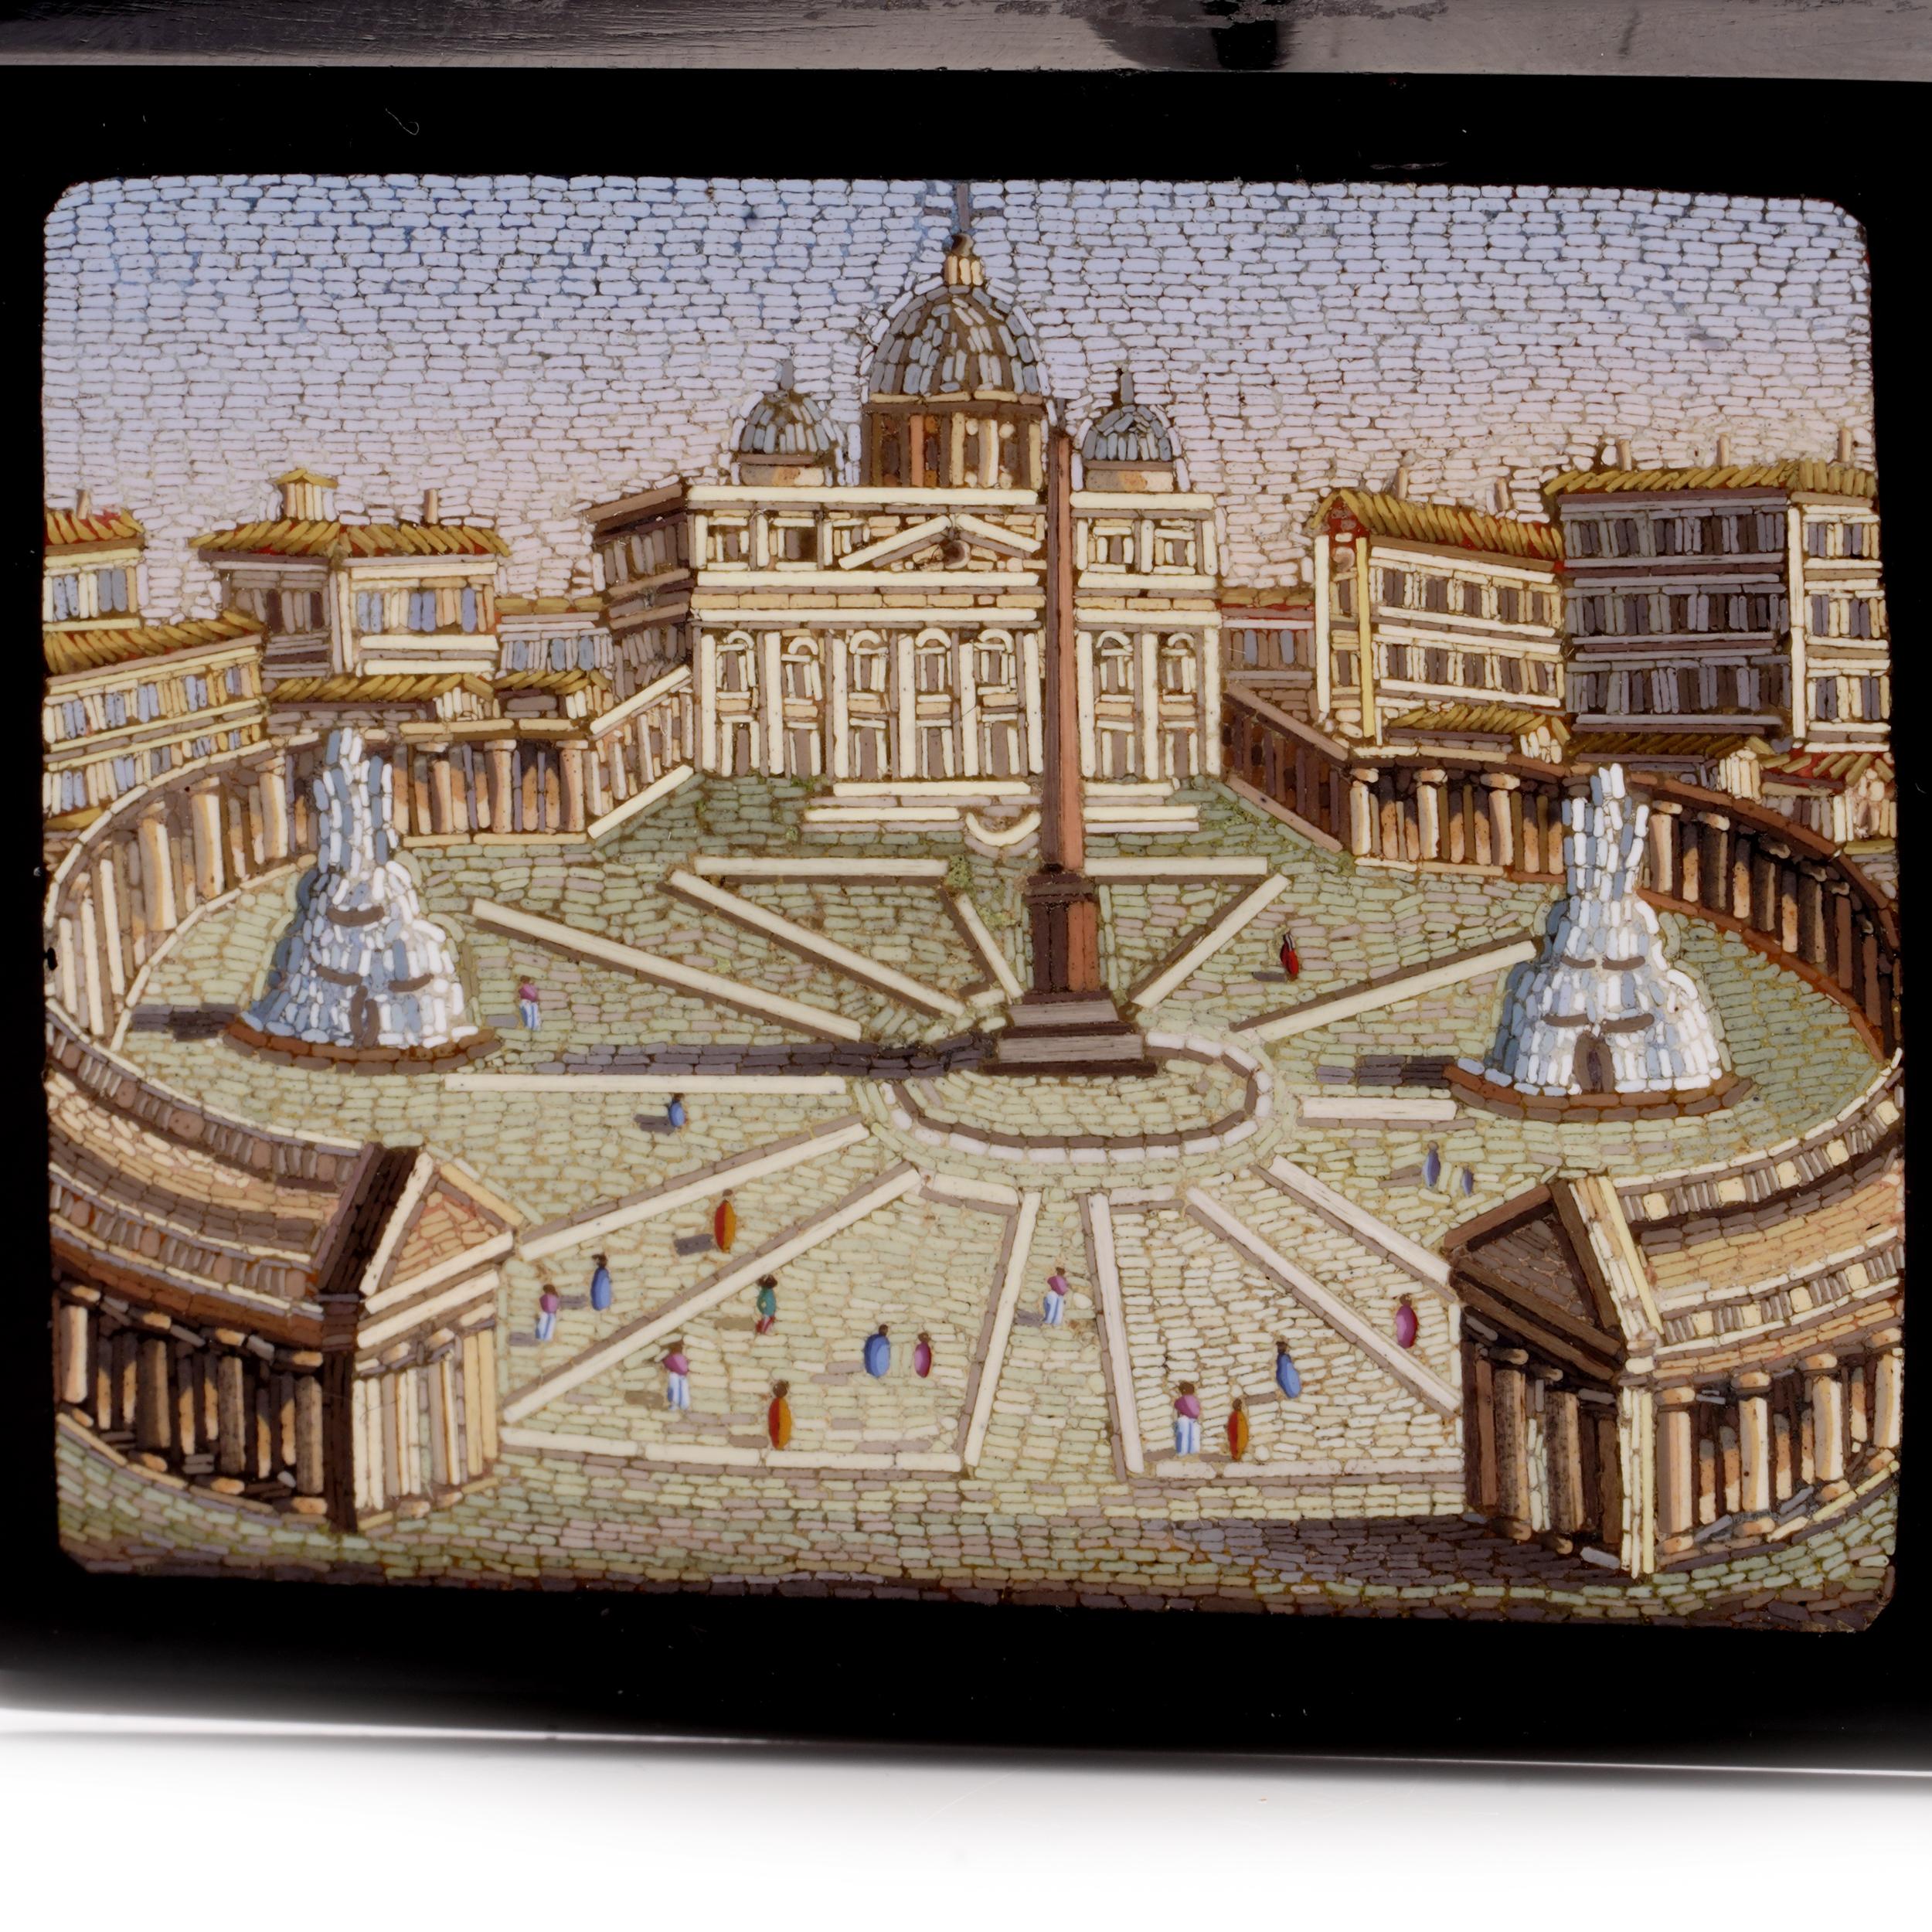 Unmounted Victorian Era Italian Grand Tour Micro Mosaic plaque, featuring a Vatican City, St. Peter's Square.  
Early 19th Century.  
The micro mosaic is mounted into black marble plaque. 

Dimensions:
Length x width x height: 49 mm x 39 mm x 5 mm